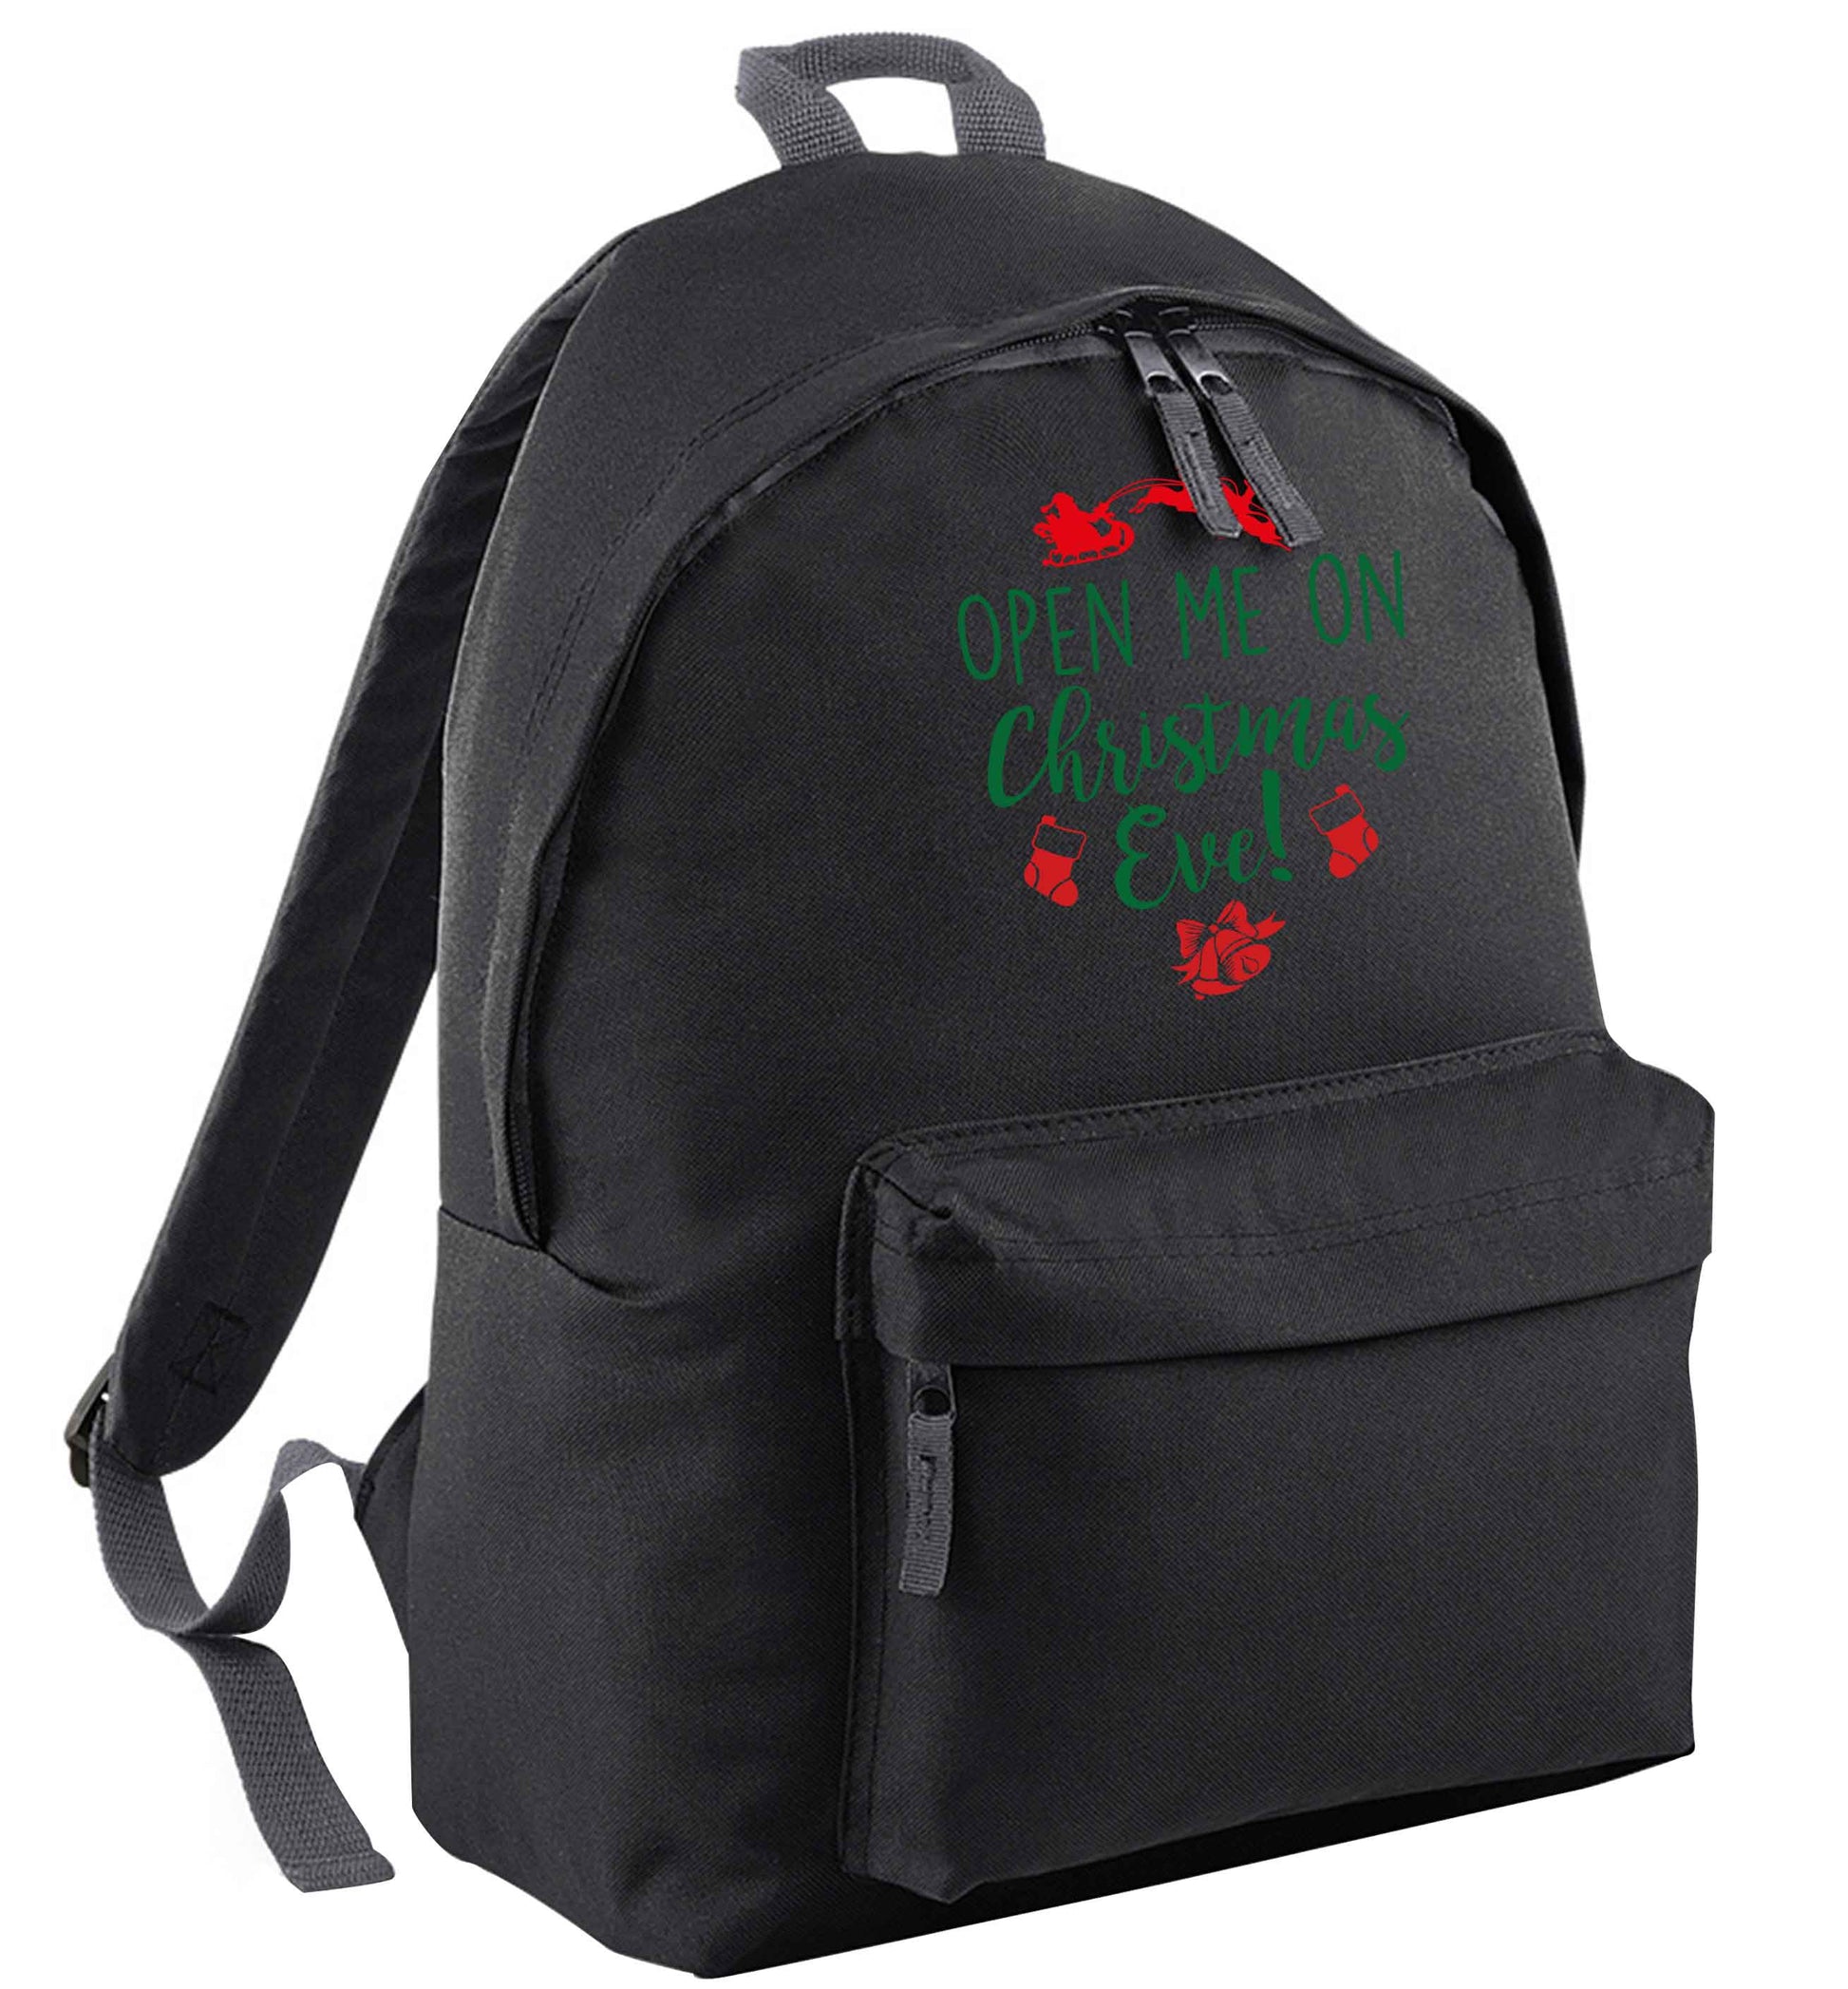 Open me on Christmas Day black adults backpack